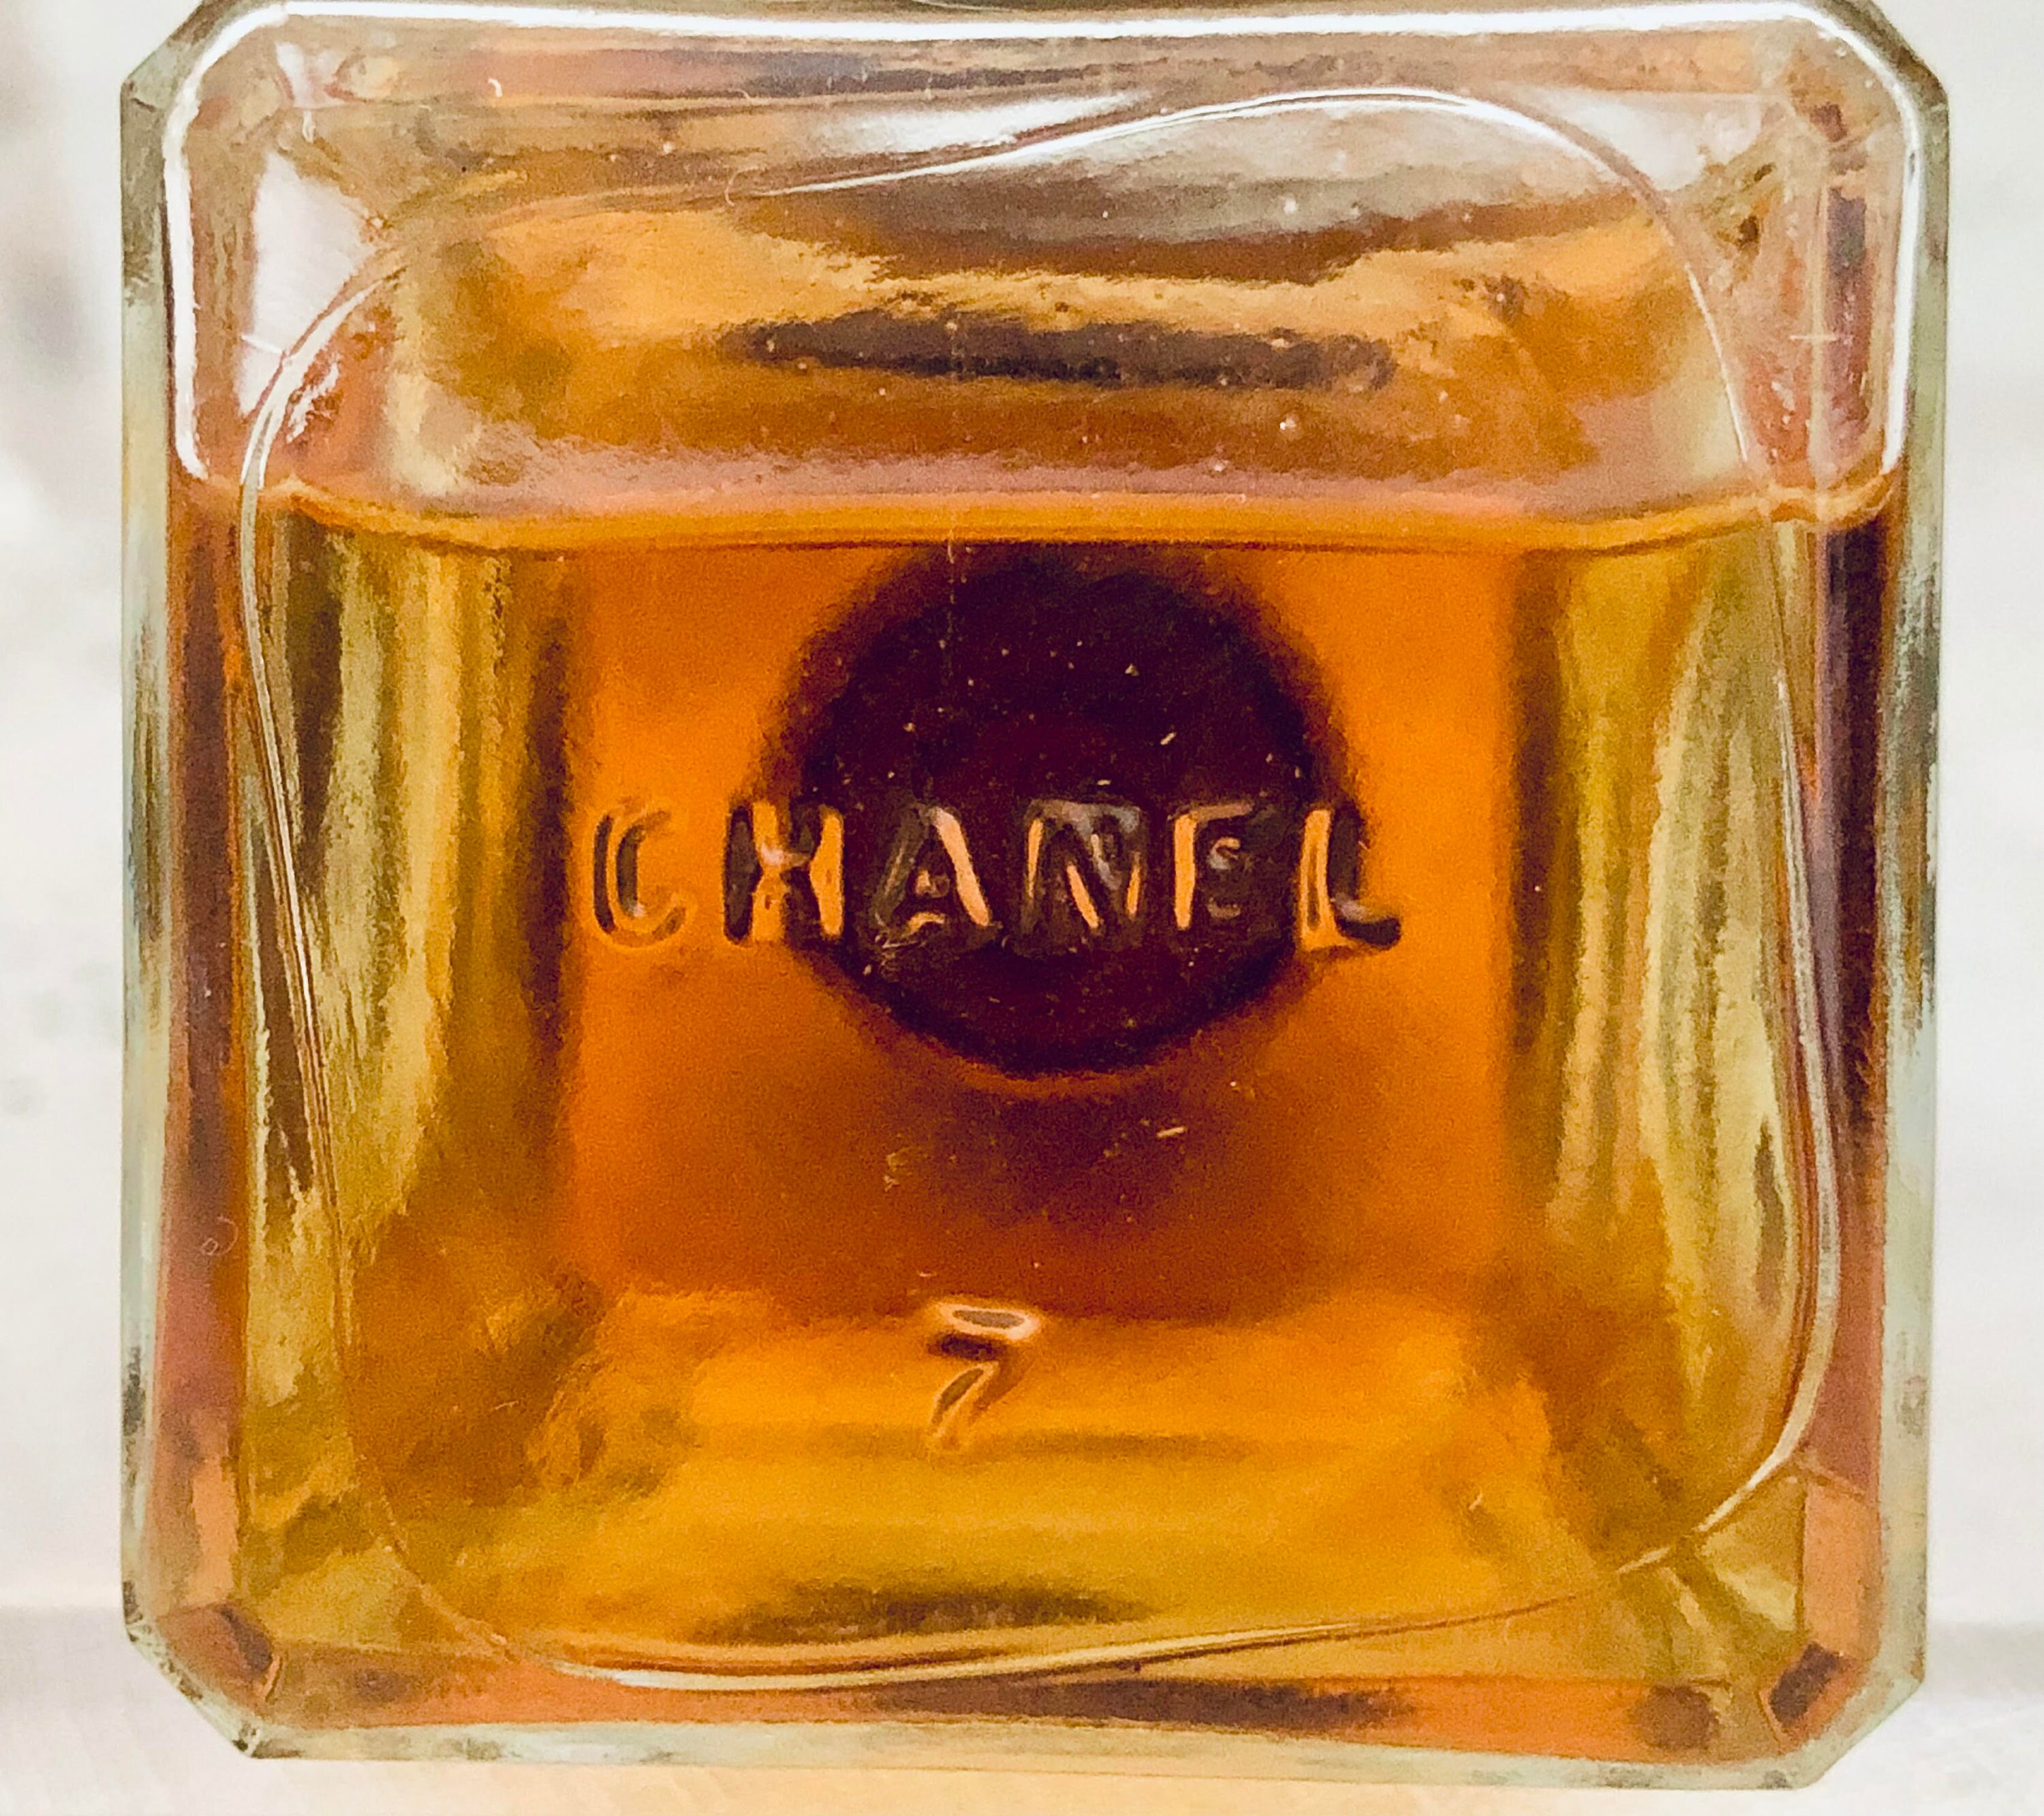 Chanel Cuir De Russie 'russia Leather' 60 Ml. or 2 